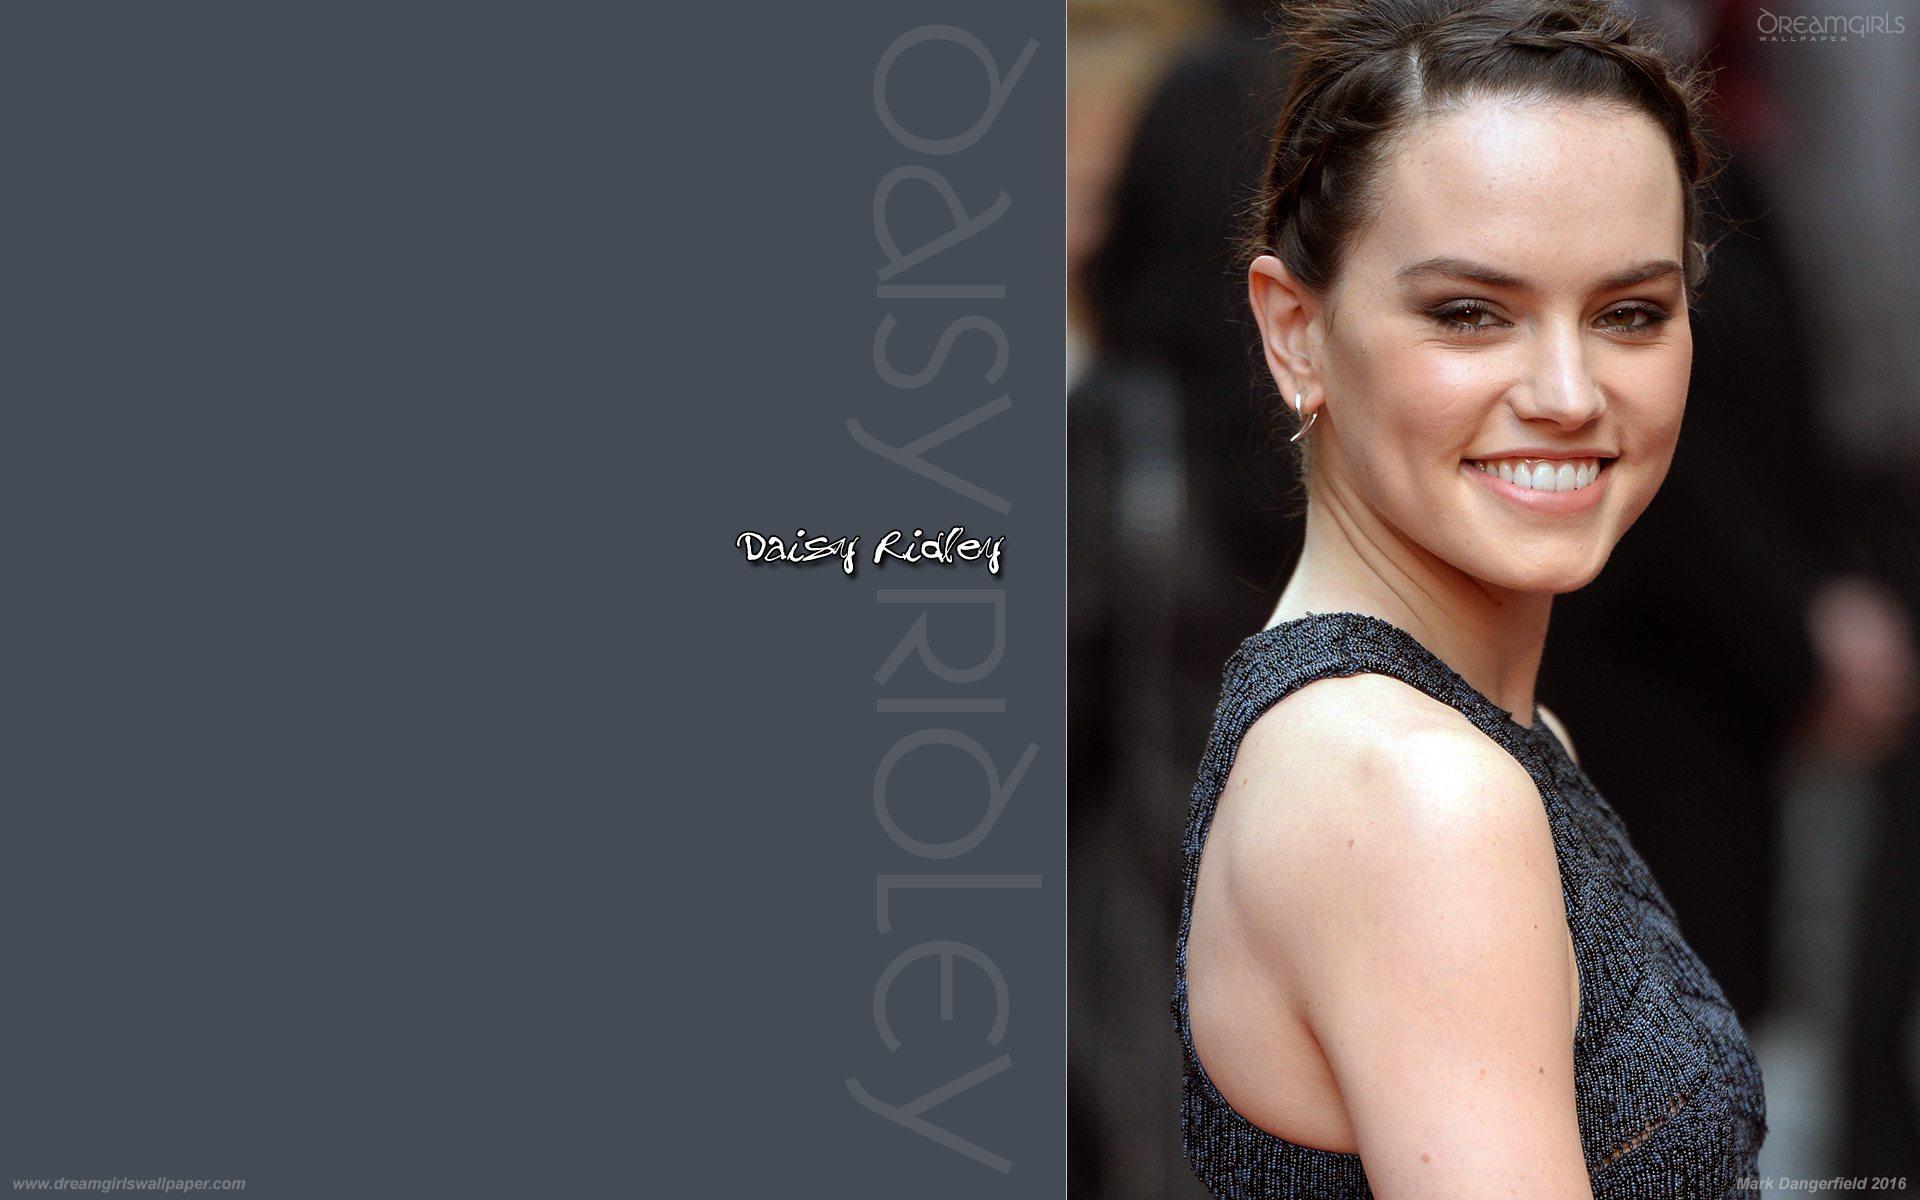 Download Original Image 1920 X 1200 Px - Daisy Ridley , HD Wallpaper & Backgrounds